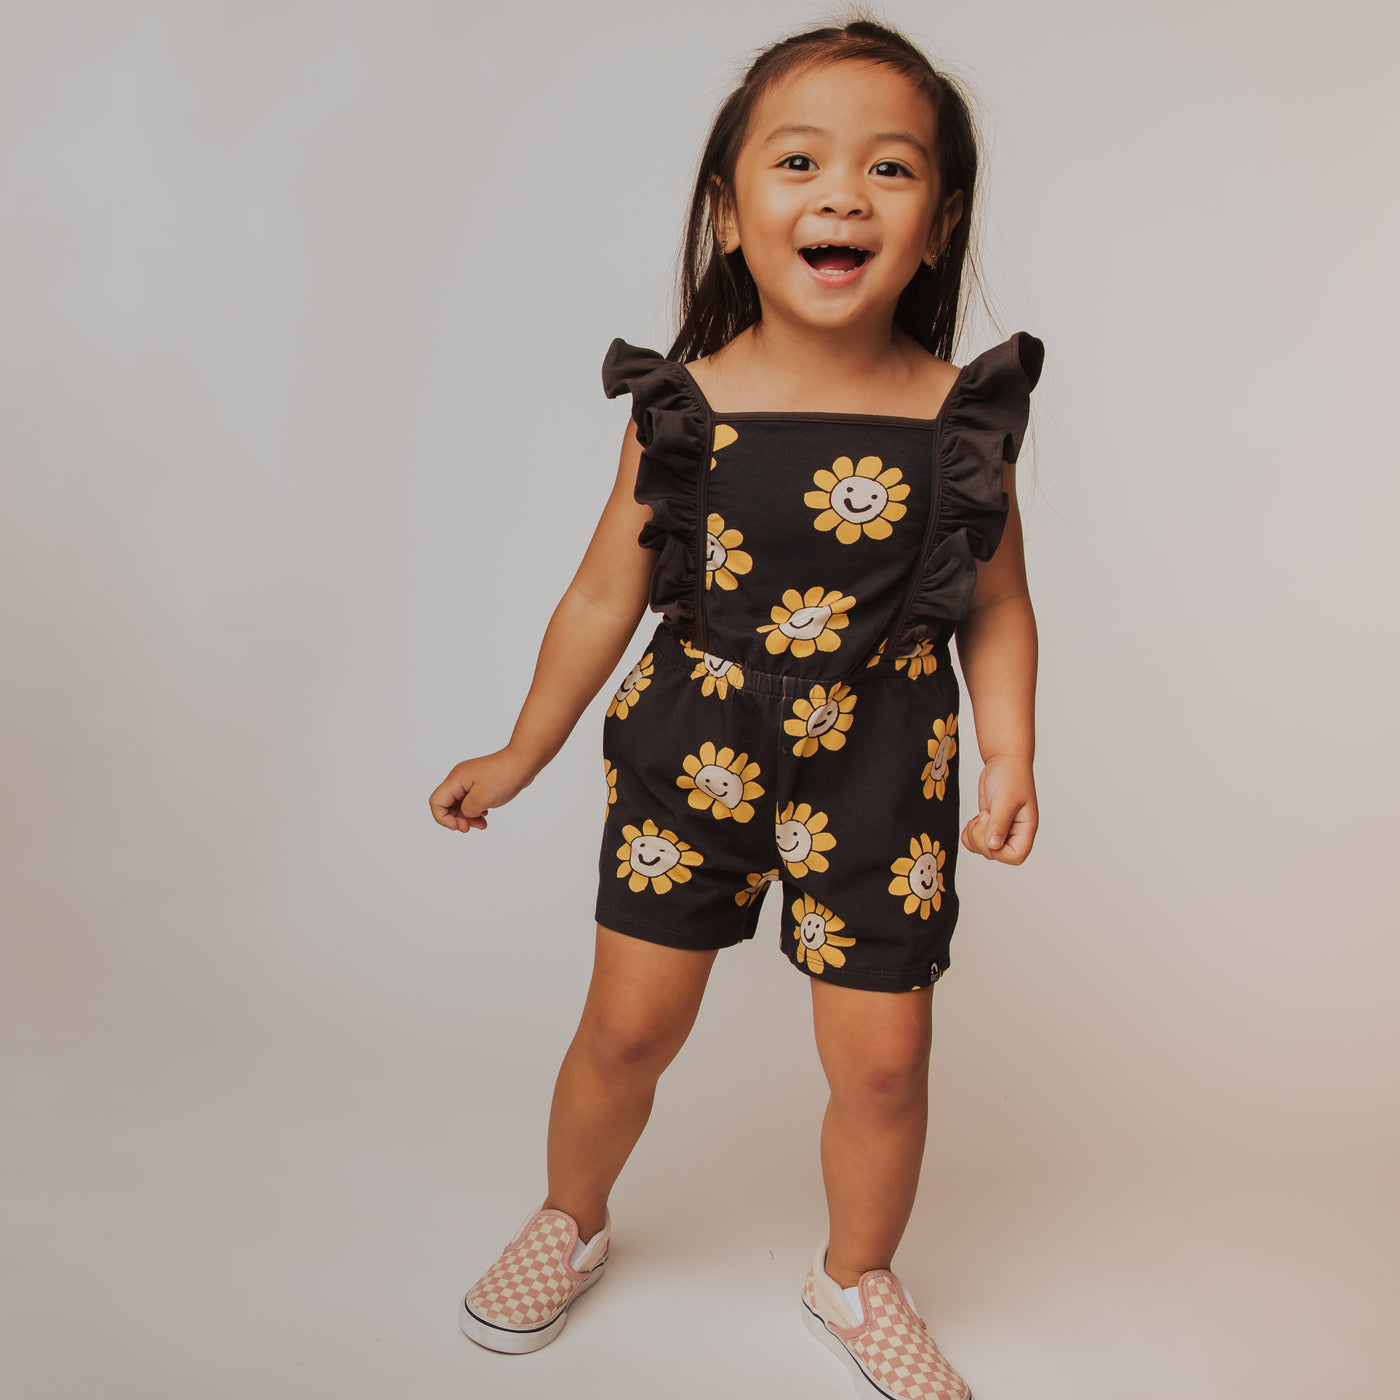 Smiley Daisies Girls Romper | Rompers & Jumpsuits | RAGS.com · RAGS.com